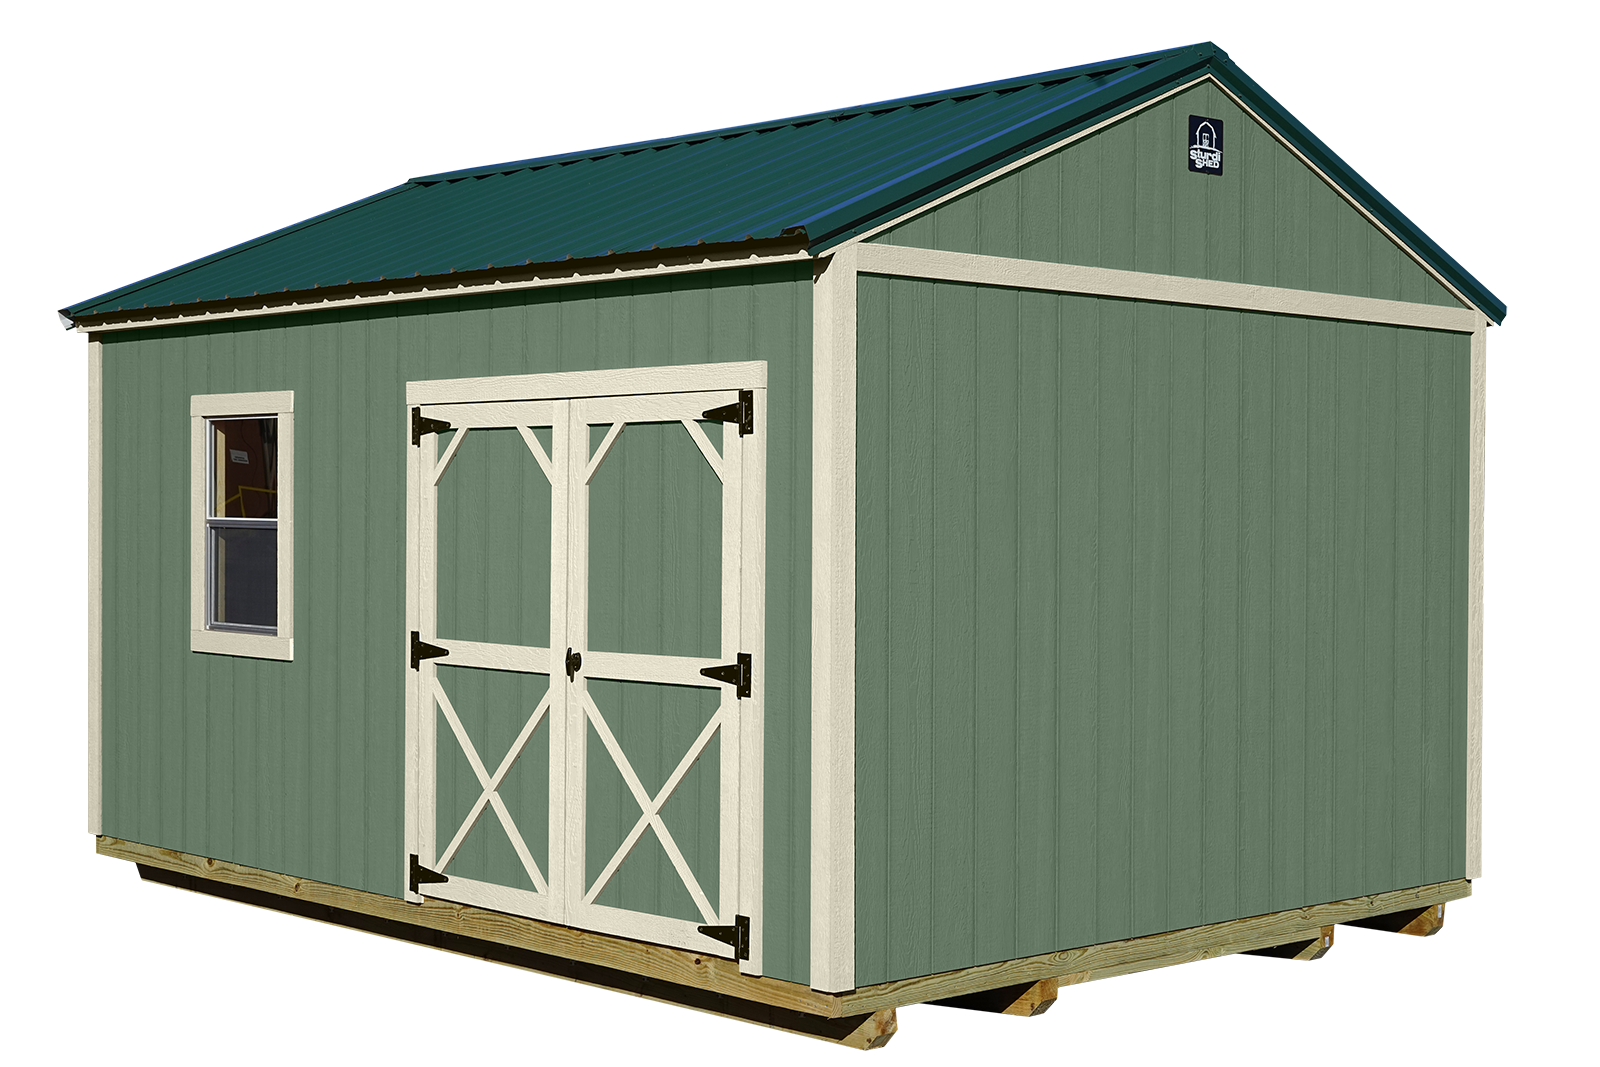 A versatile storage shed workshop – Creating a dedicated space in your backyard